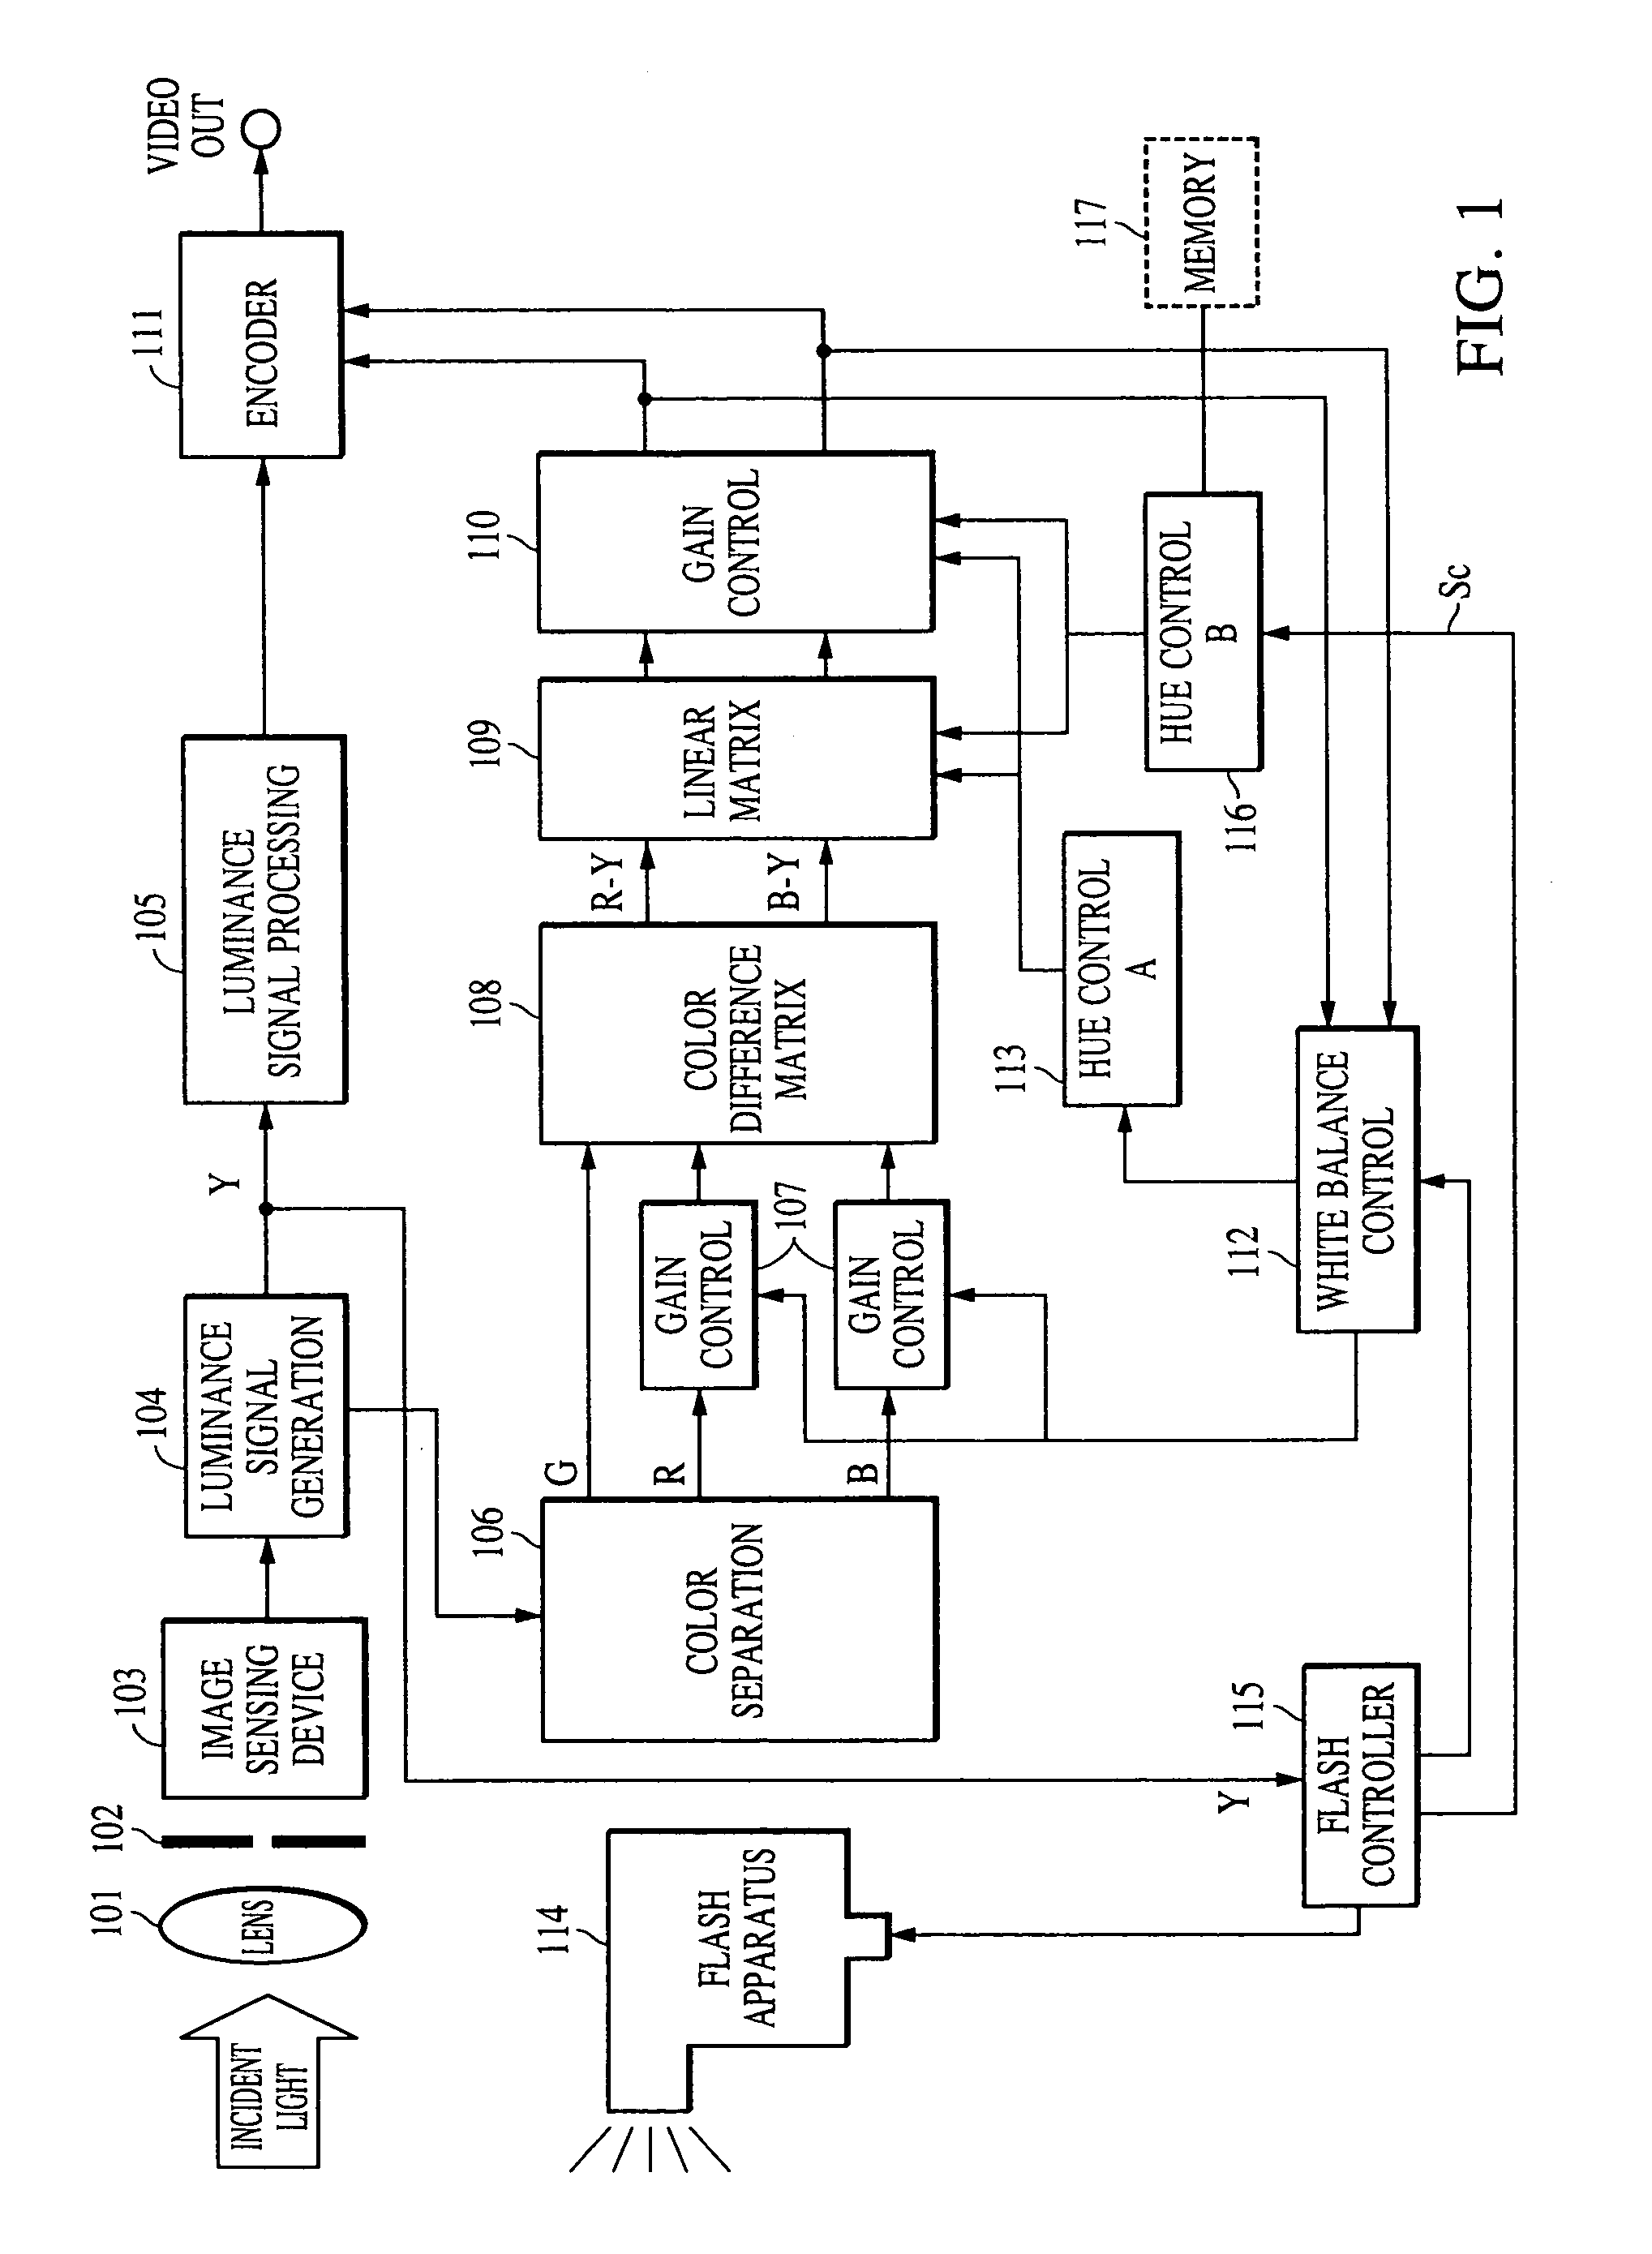 Image pickup apparatus having flash and color adjustment control